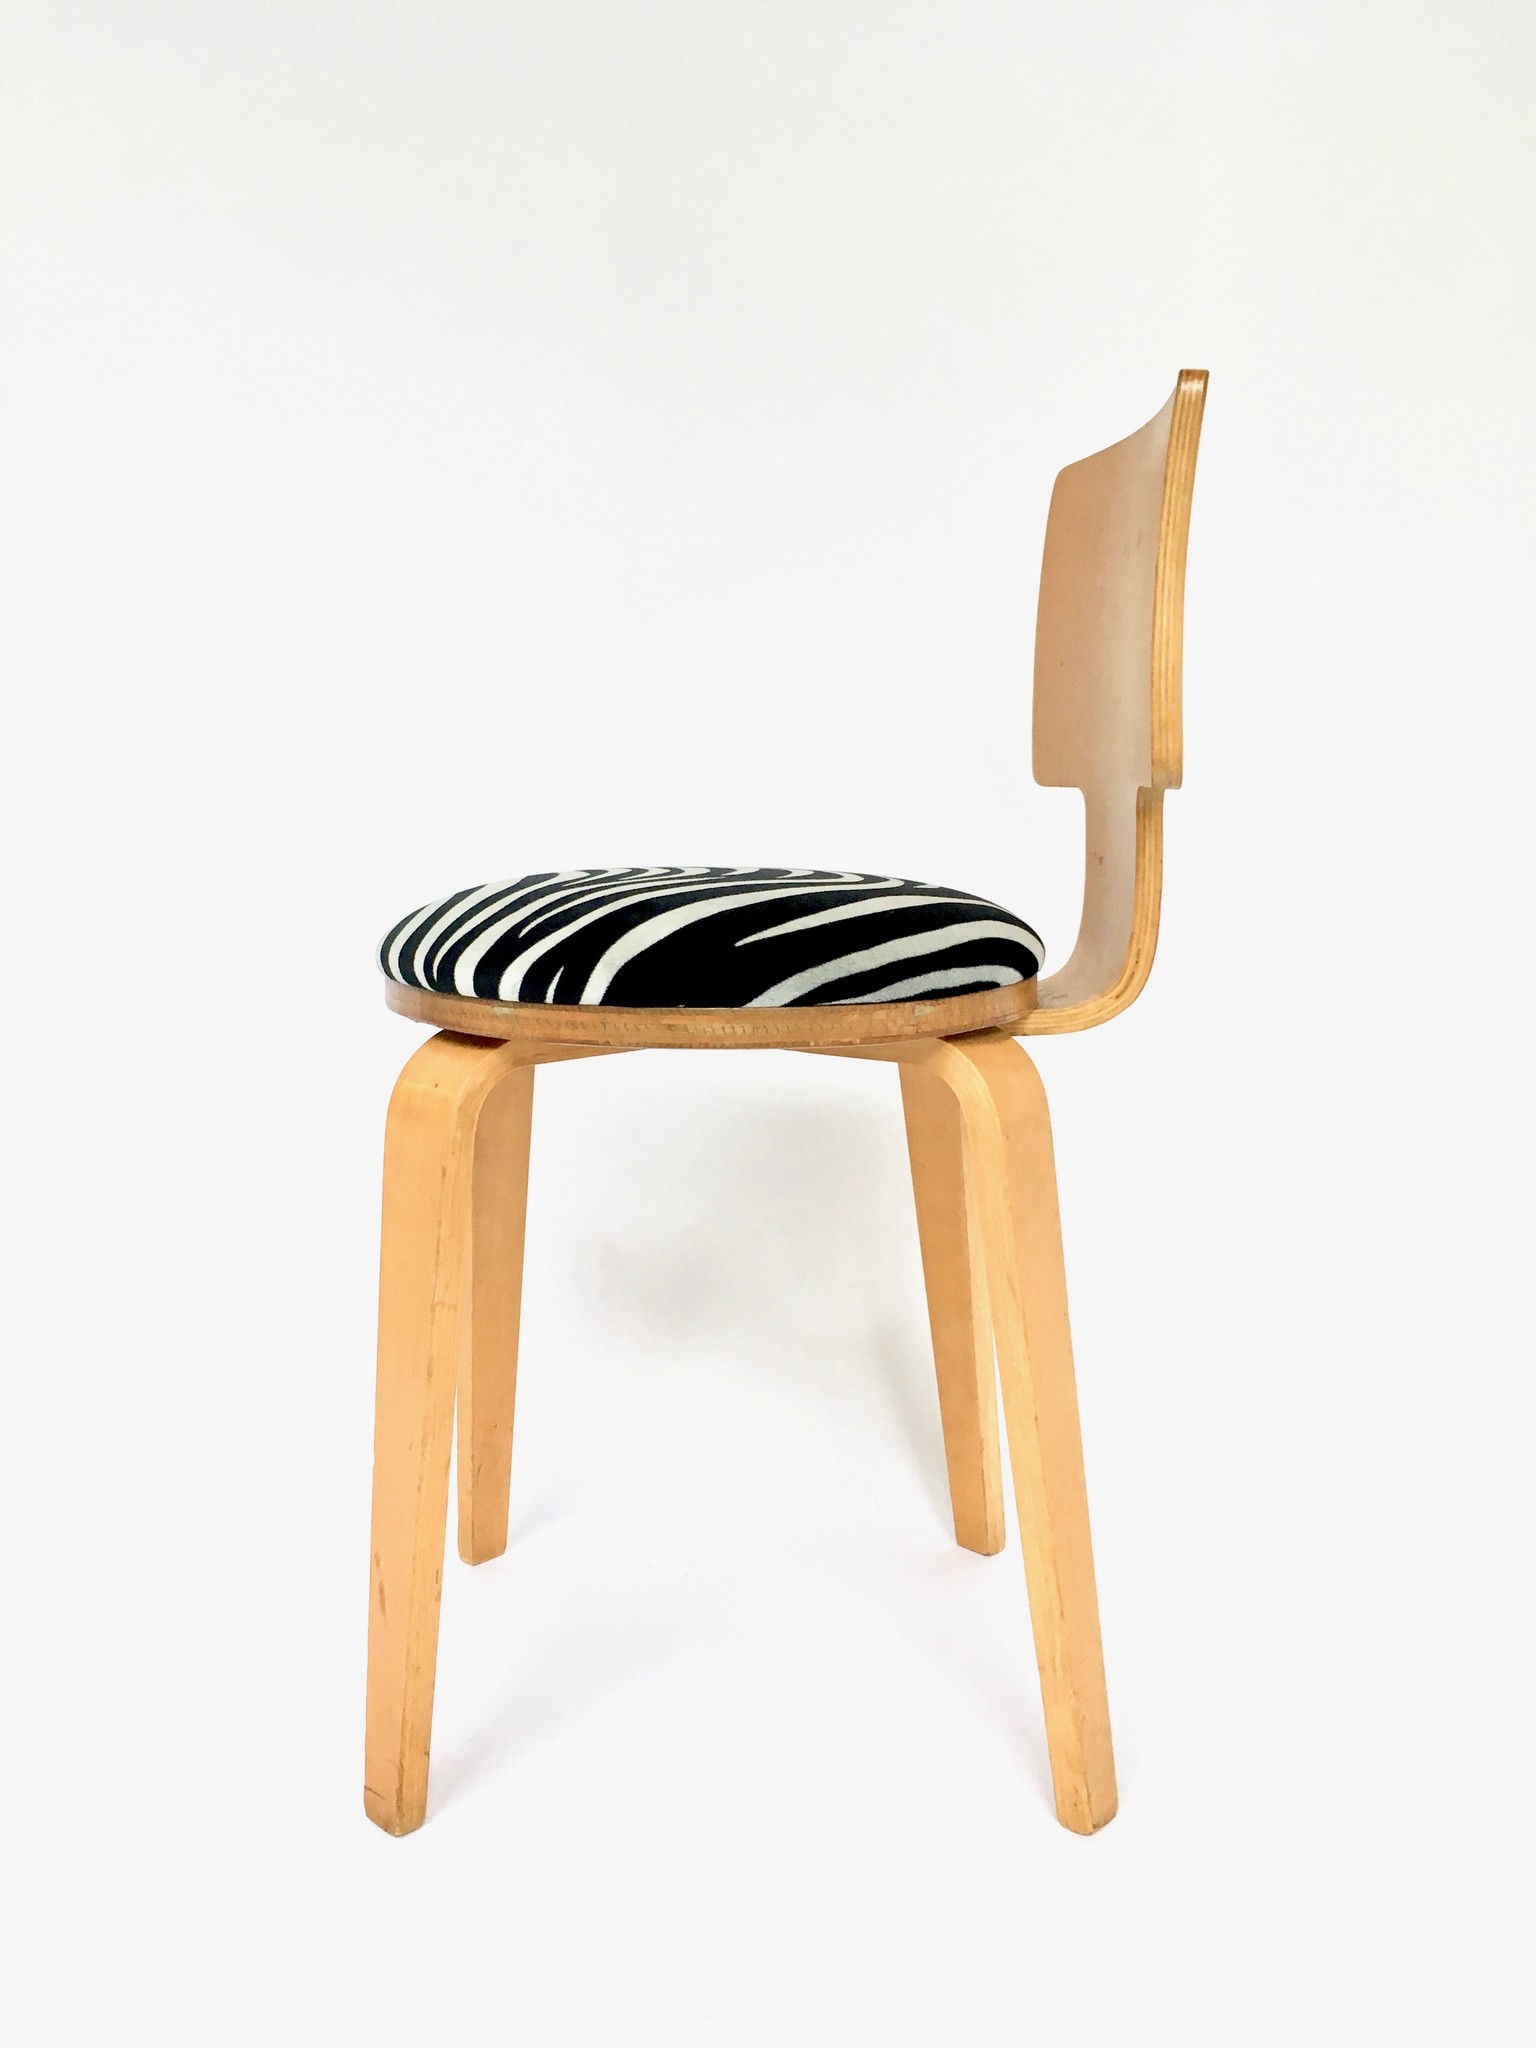 Cor Alons and J.C. Jansen chairs for Den Boer Gouda